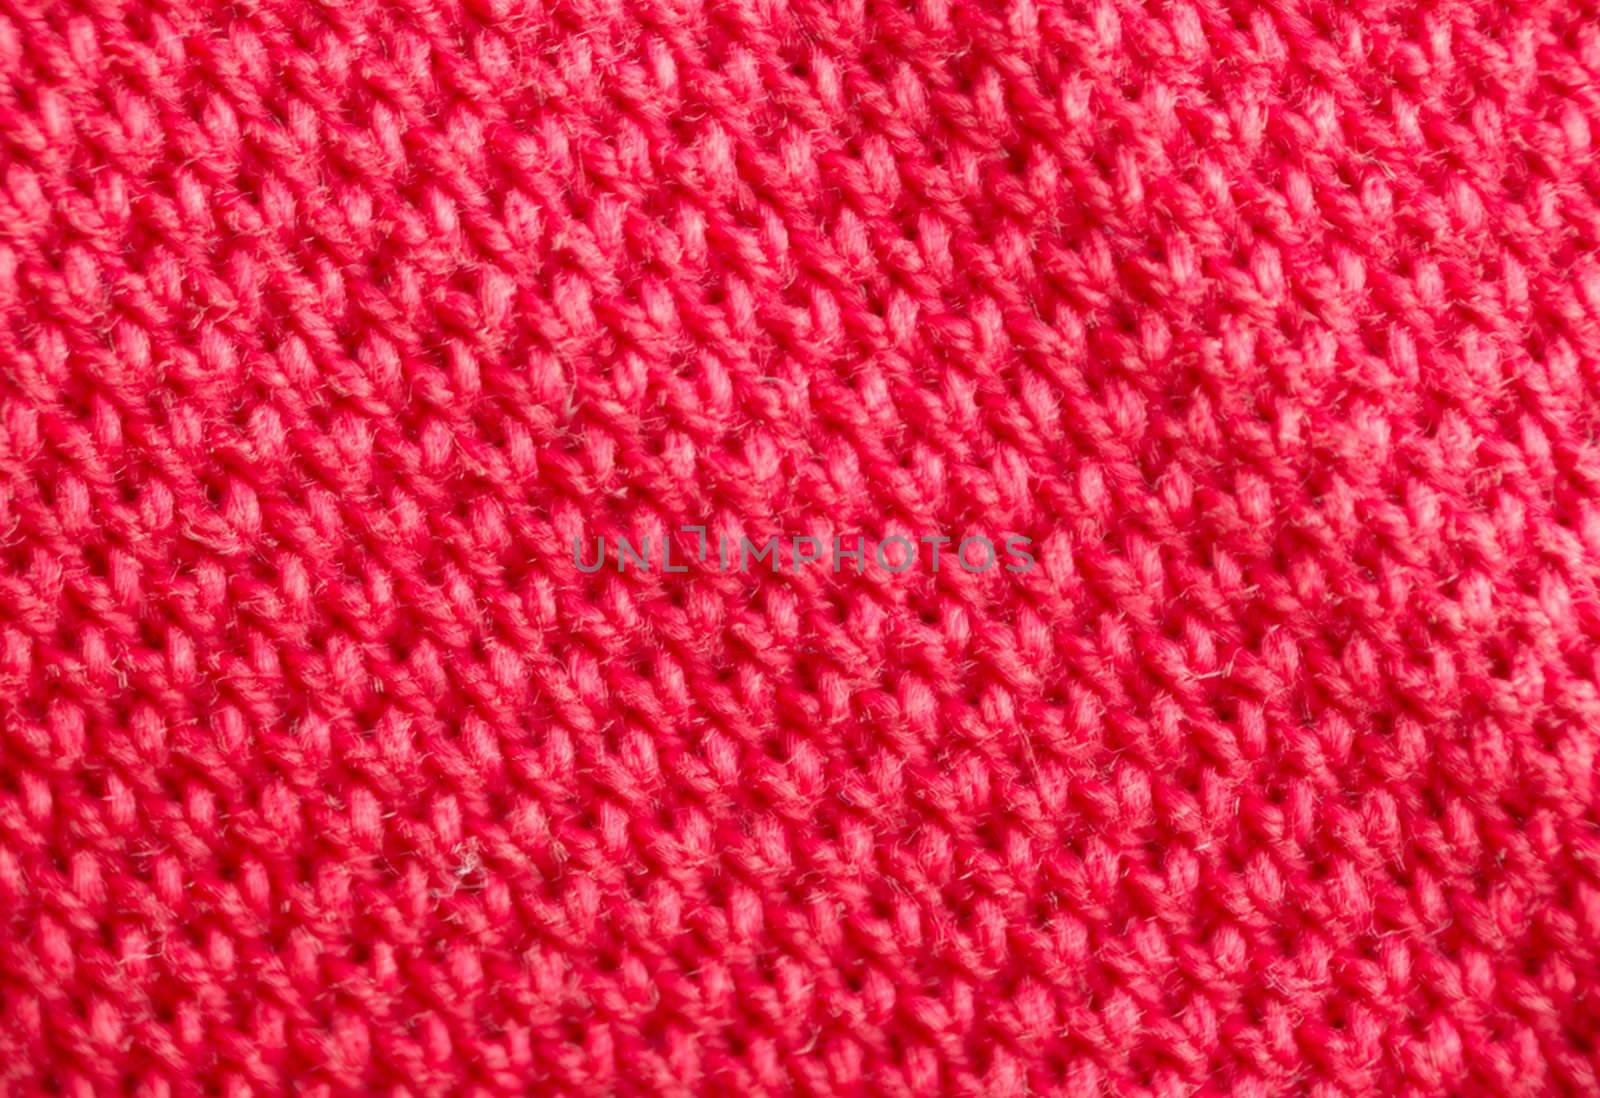 macro pattern of red textile fabric .